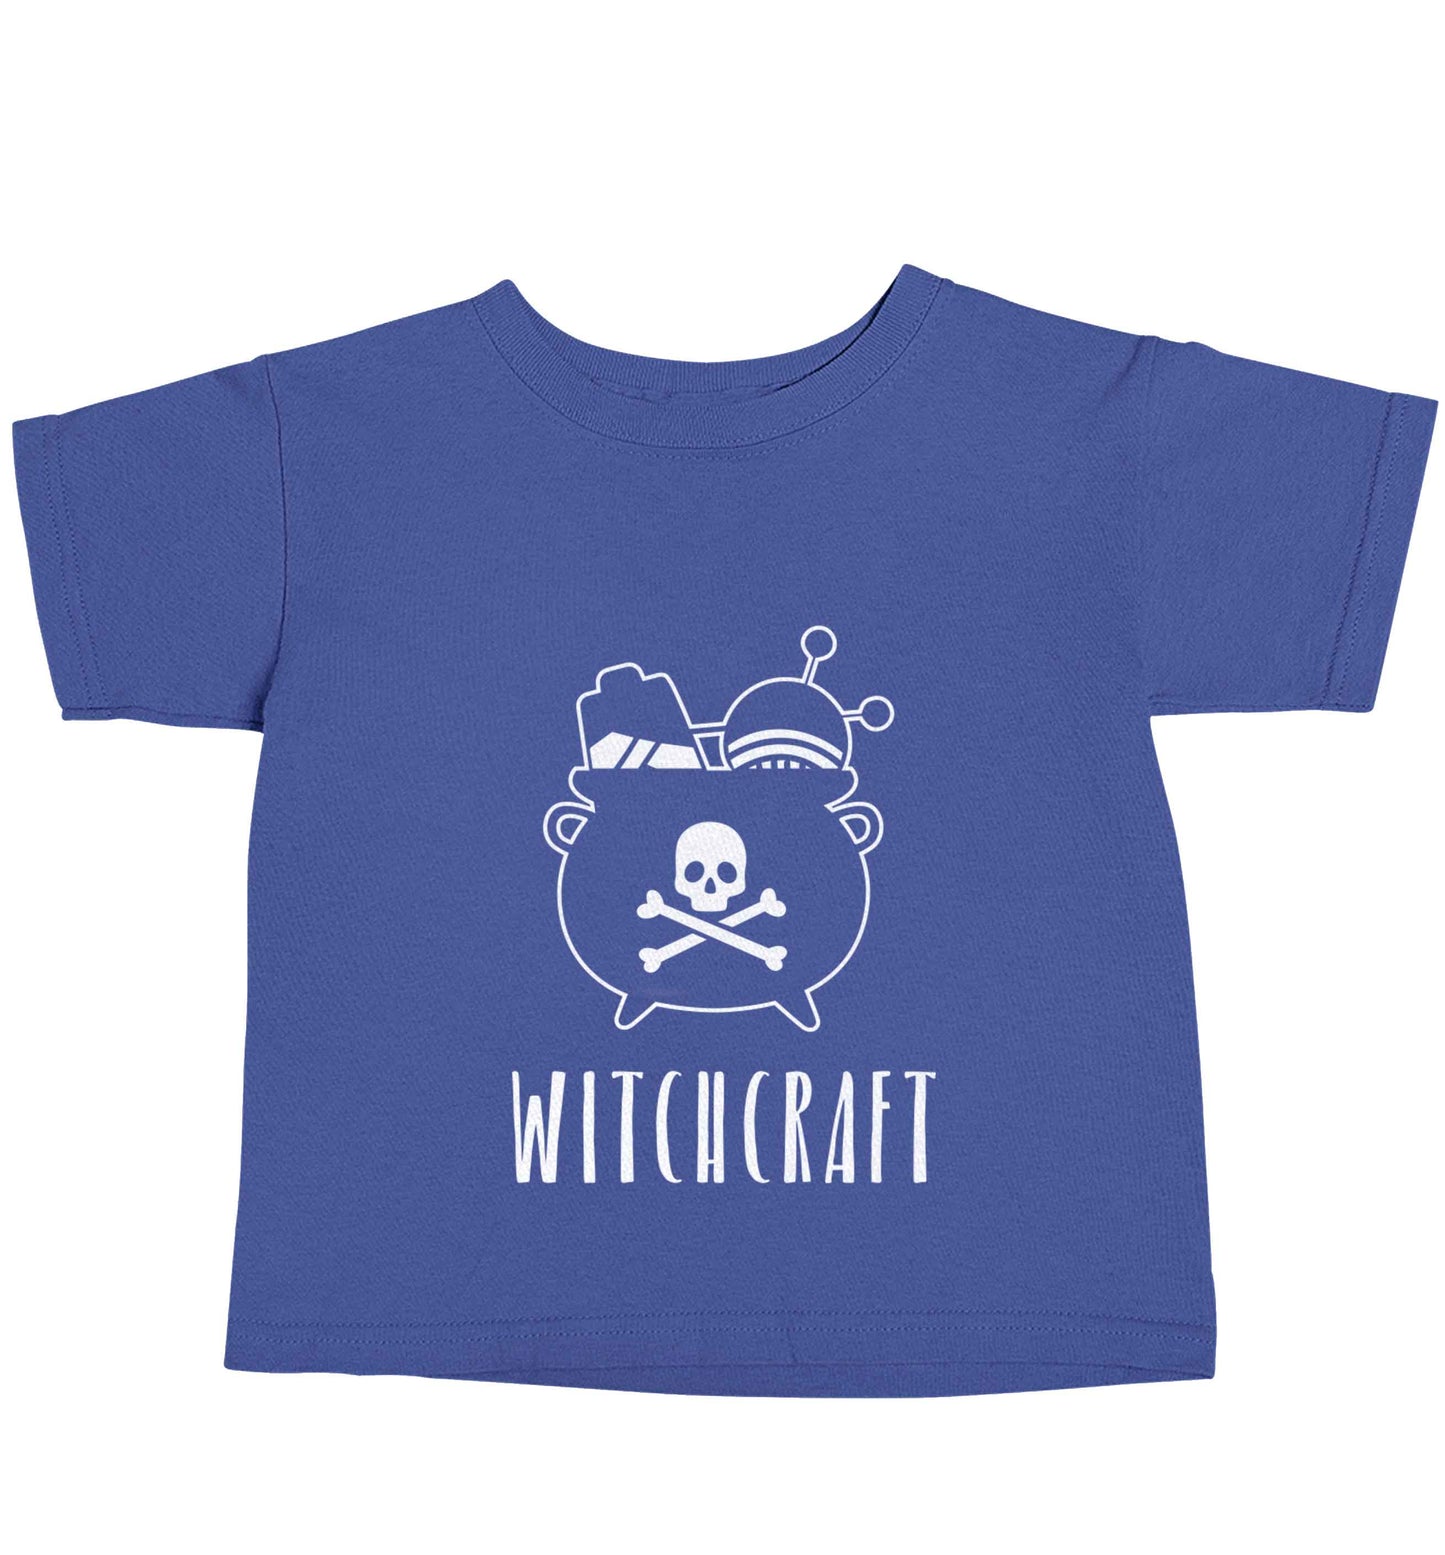 Witchcraft blue baby toddler Tshirt 2 Years